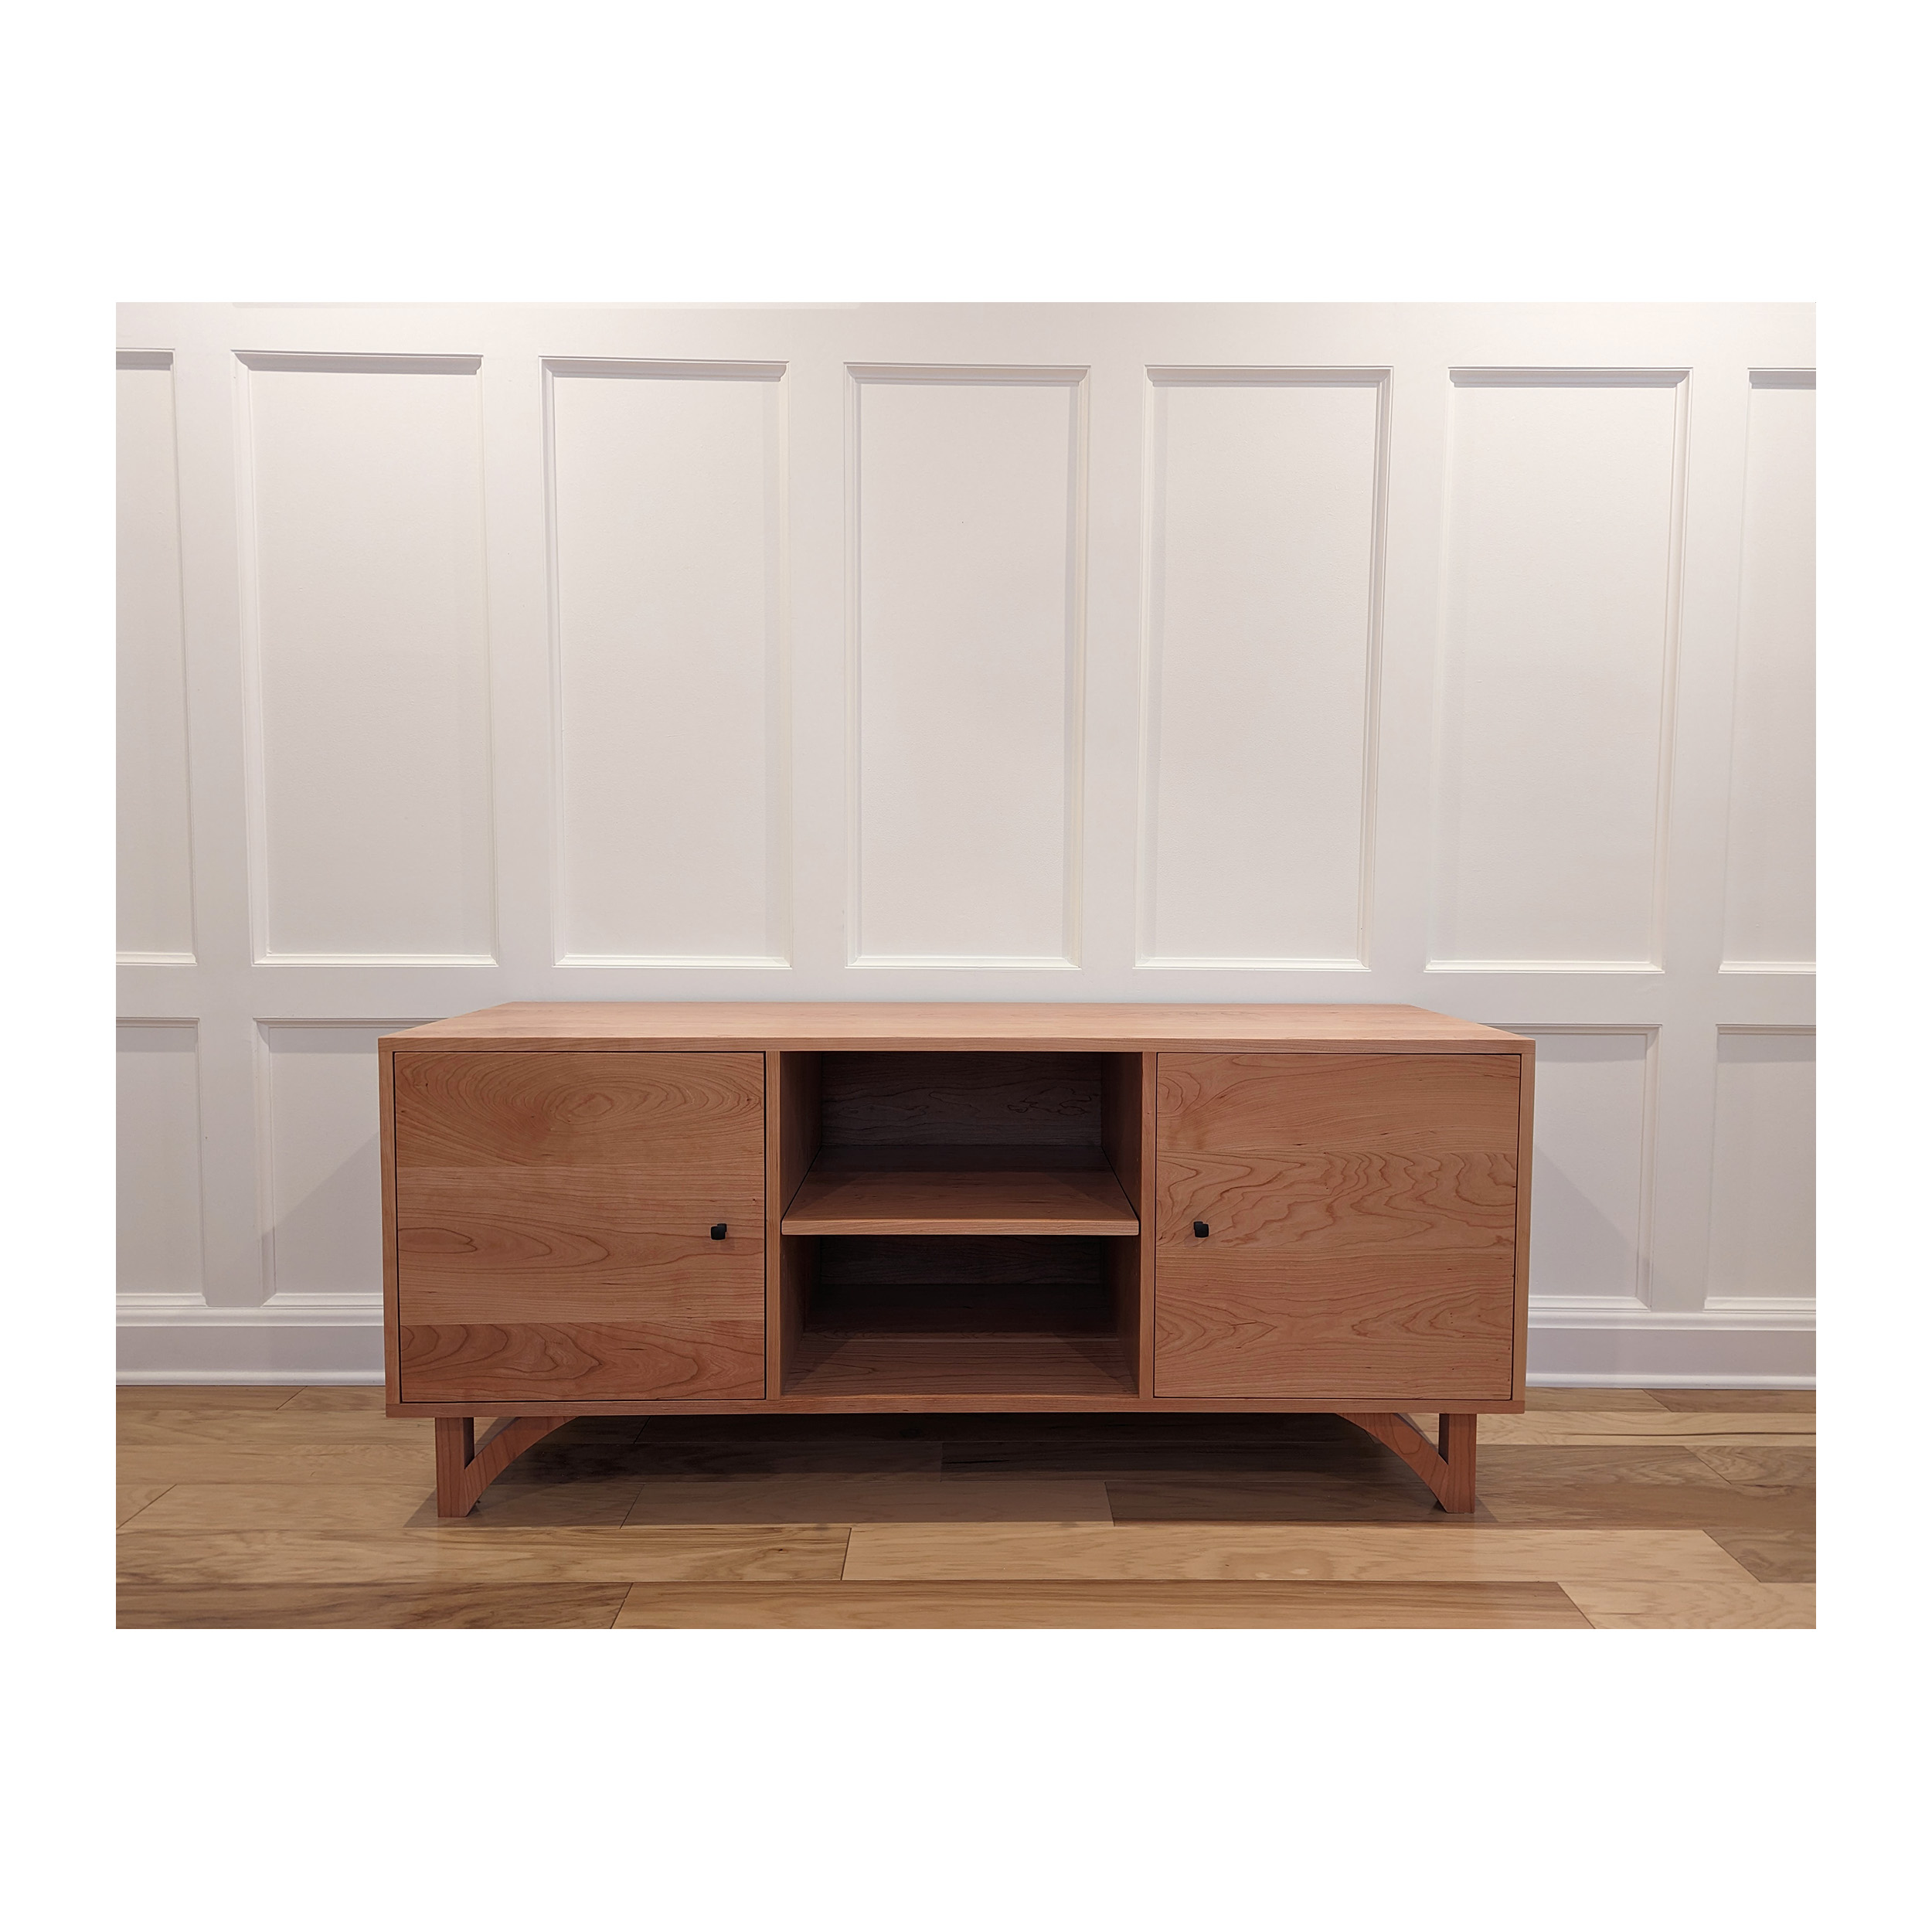 Series 454 Media Cabinet With Two Doors At 60″ In Width